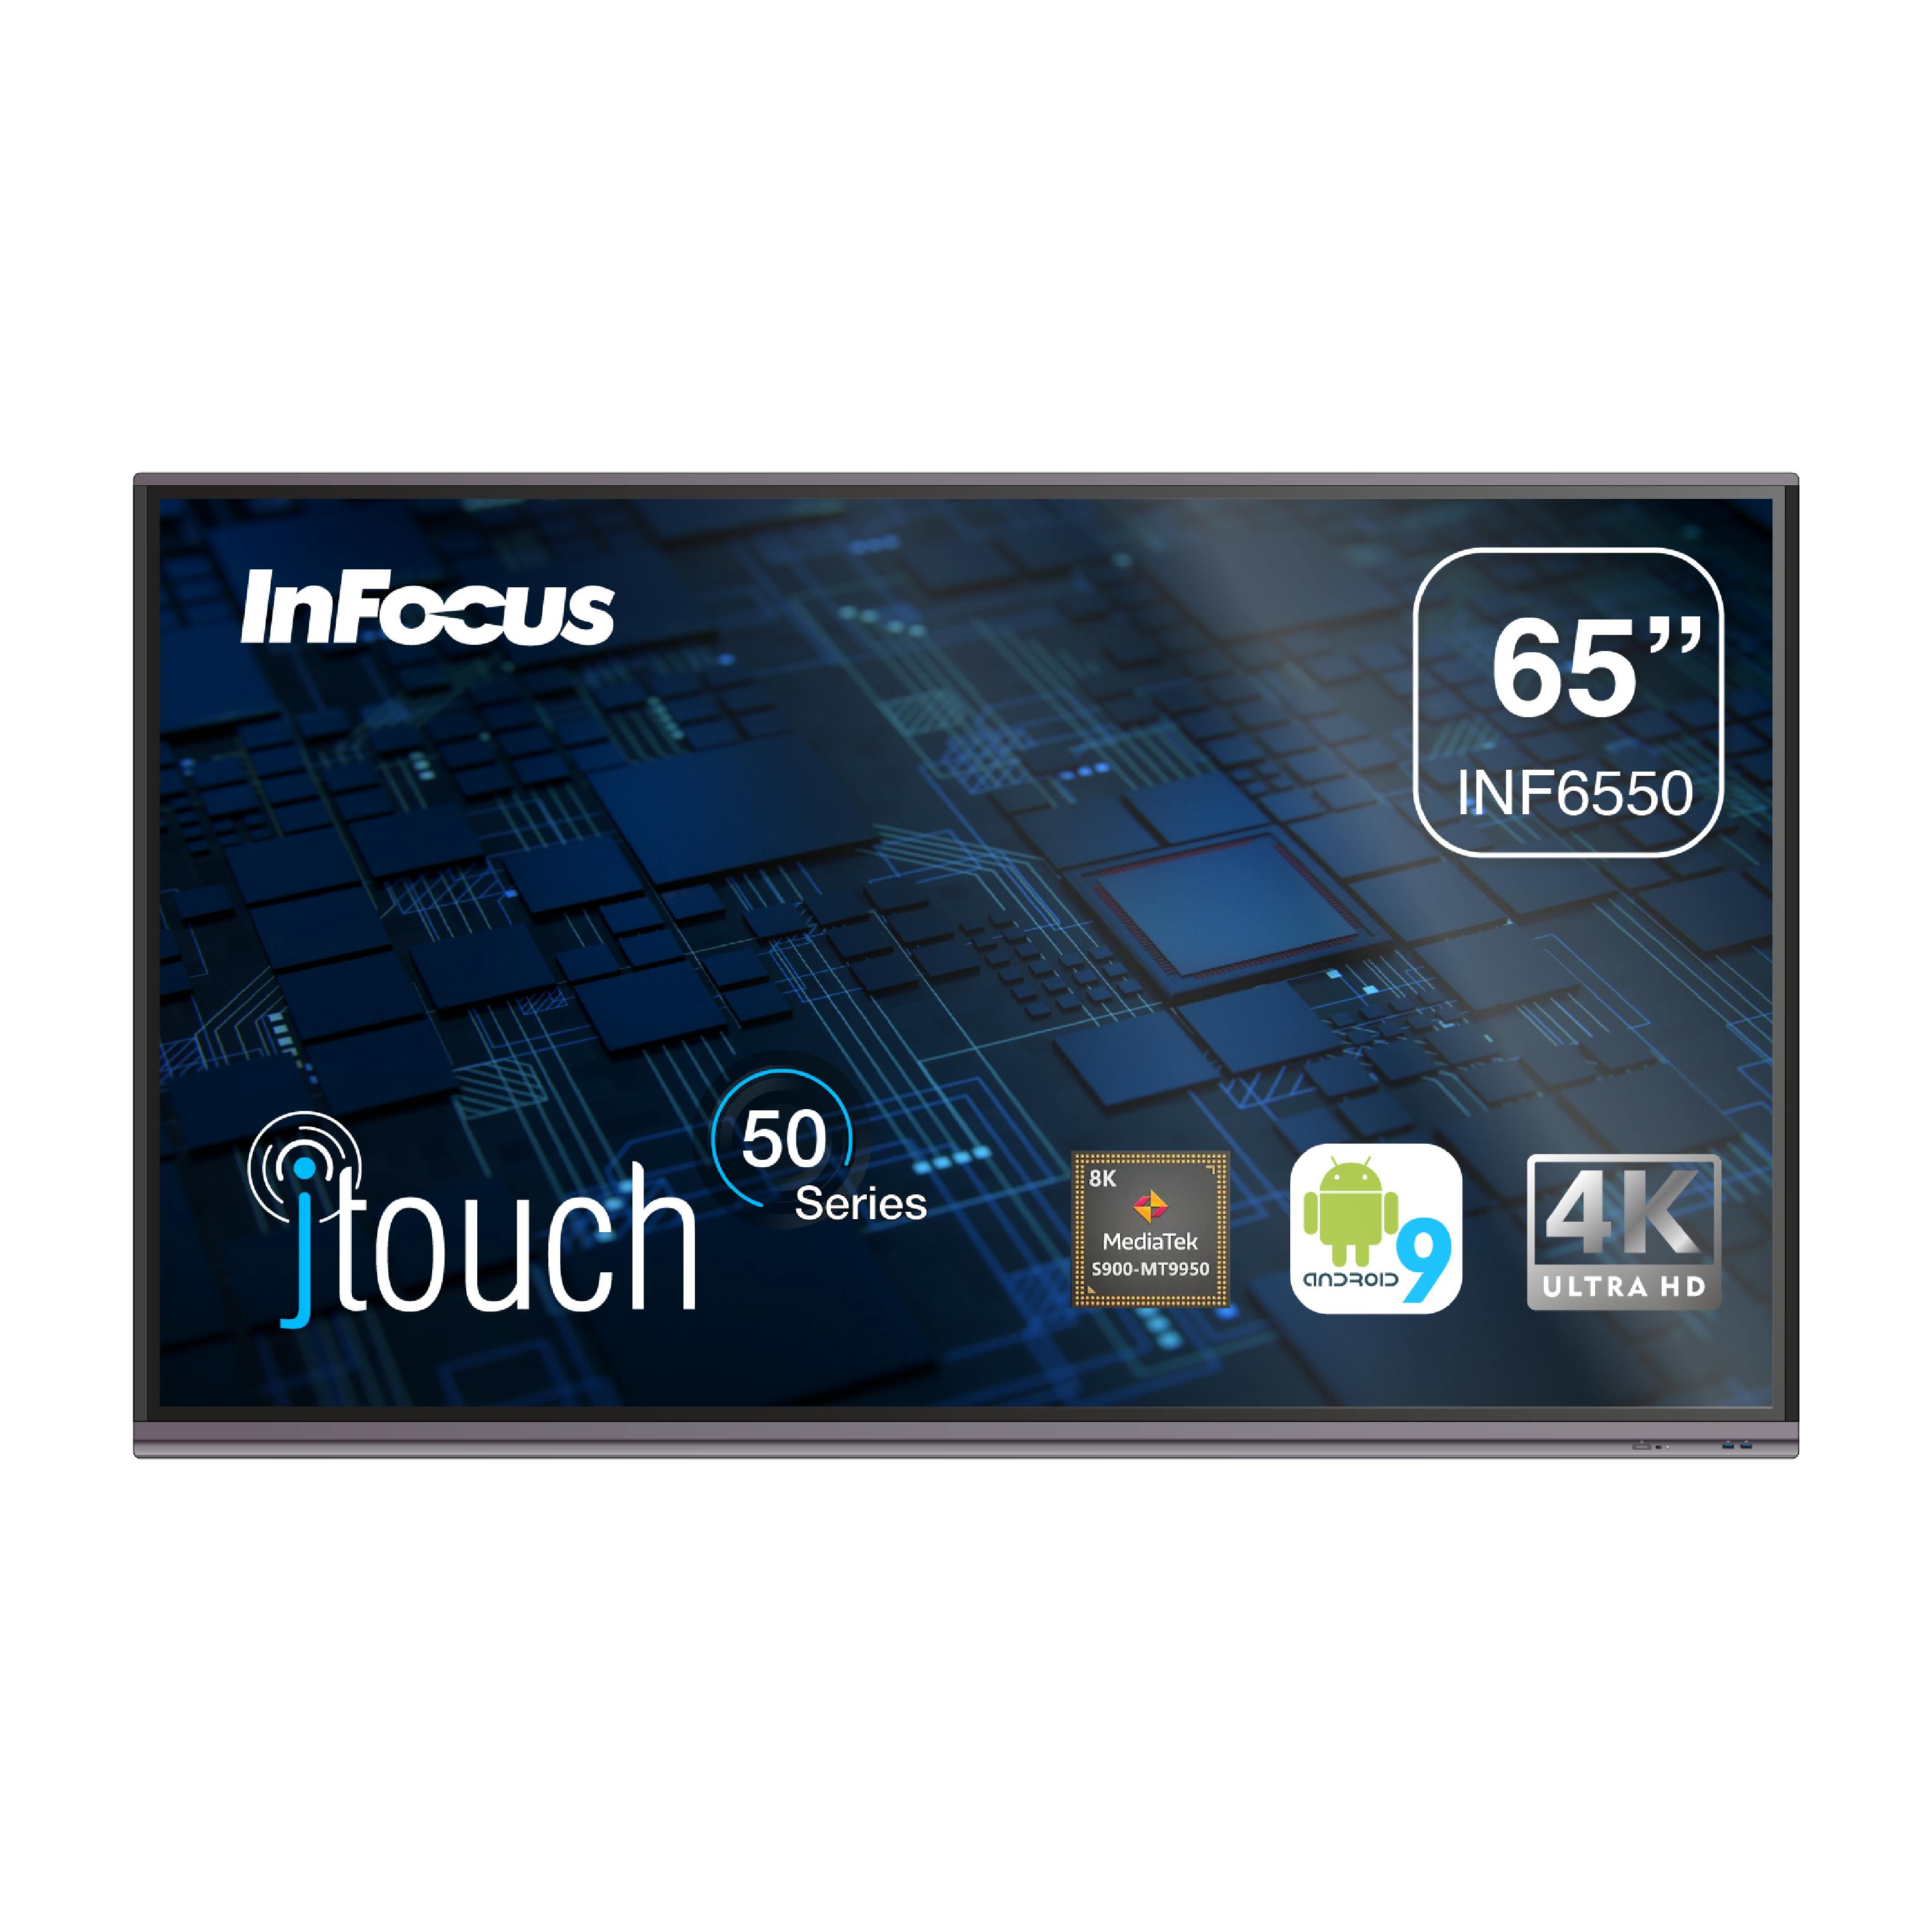 https://infocus.imgix.net/2022/04/JTouch-50-Series_INF6550_F_90-01.png?auto=compress%2Cformat&ixlib=php-3.3.1